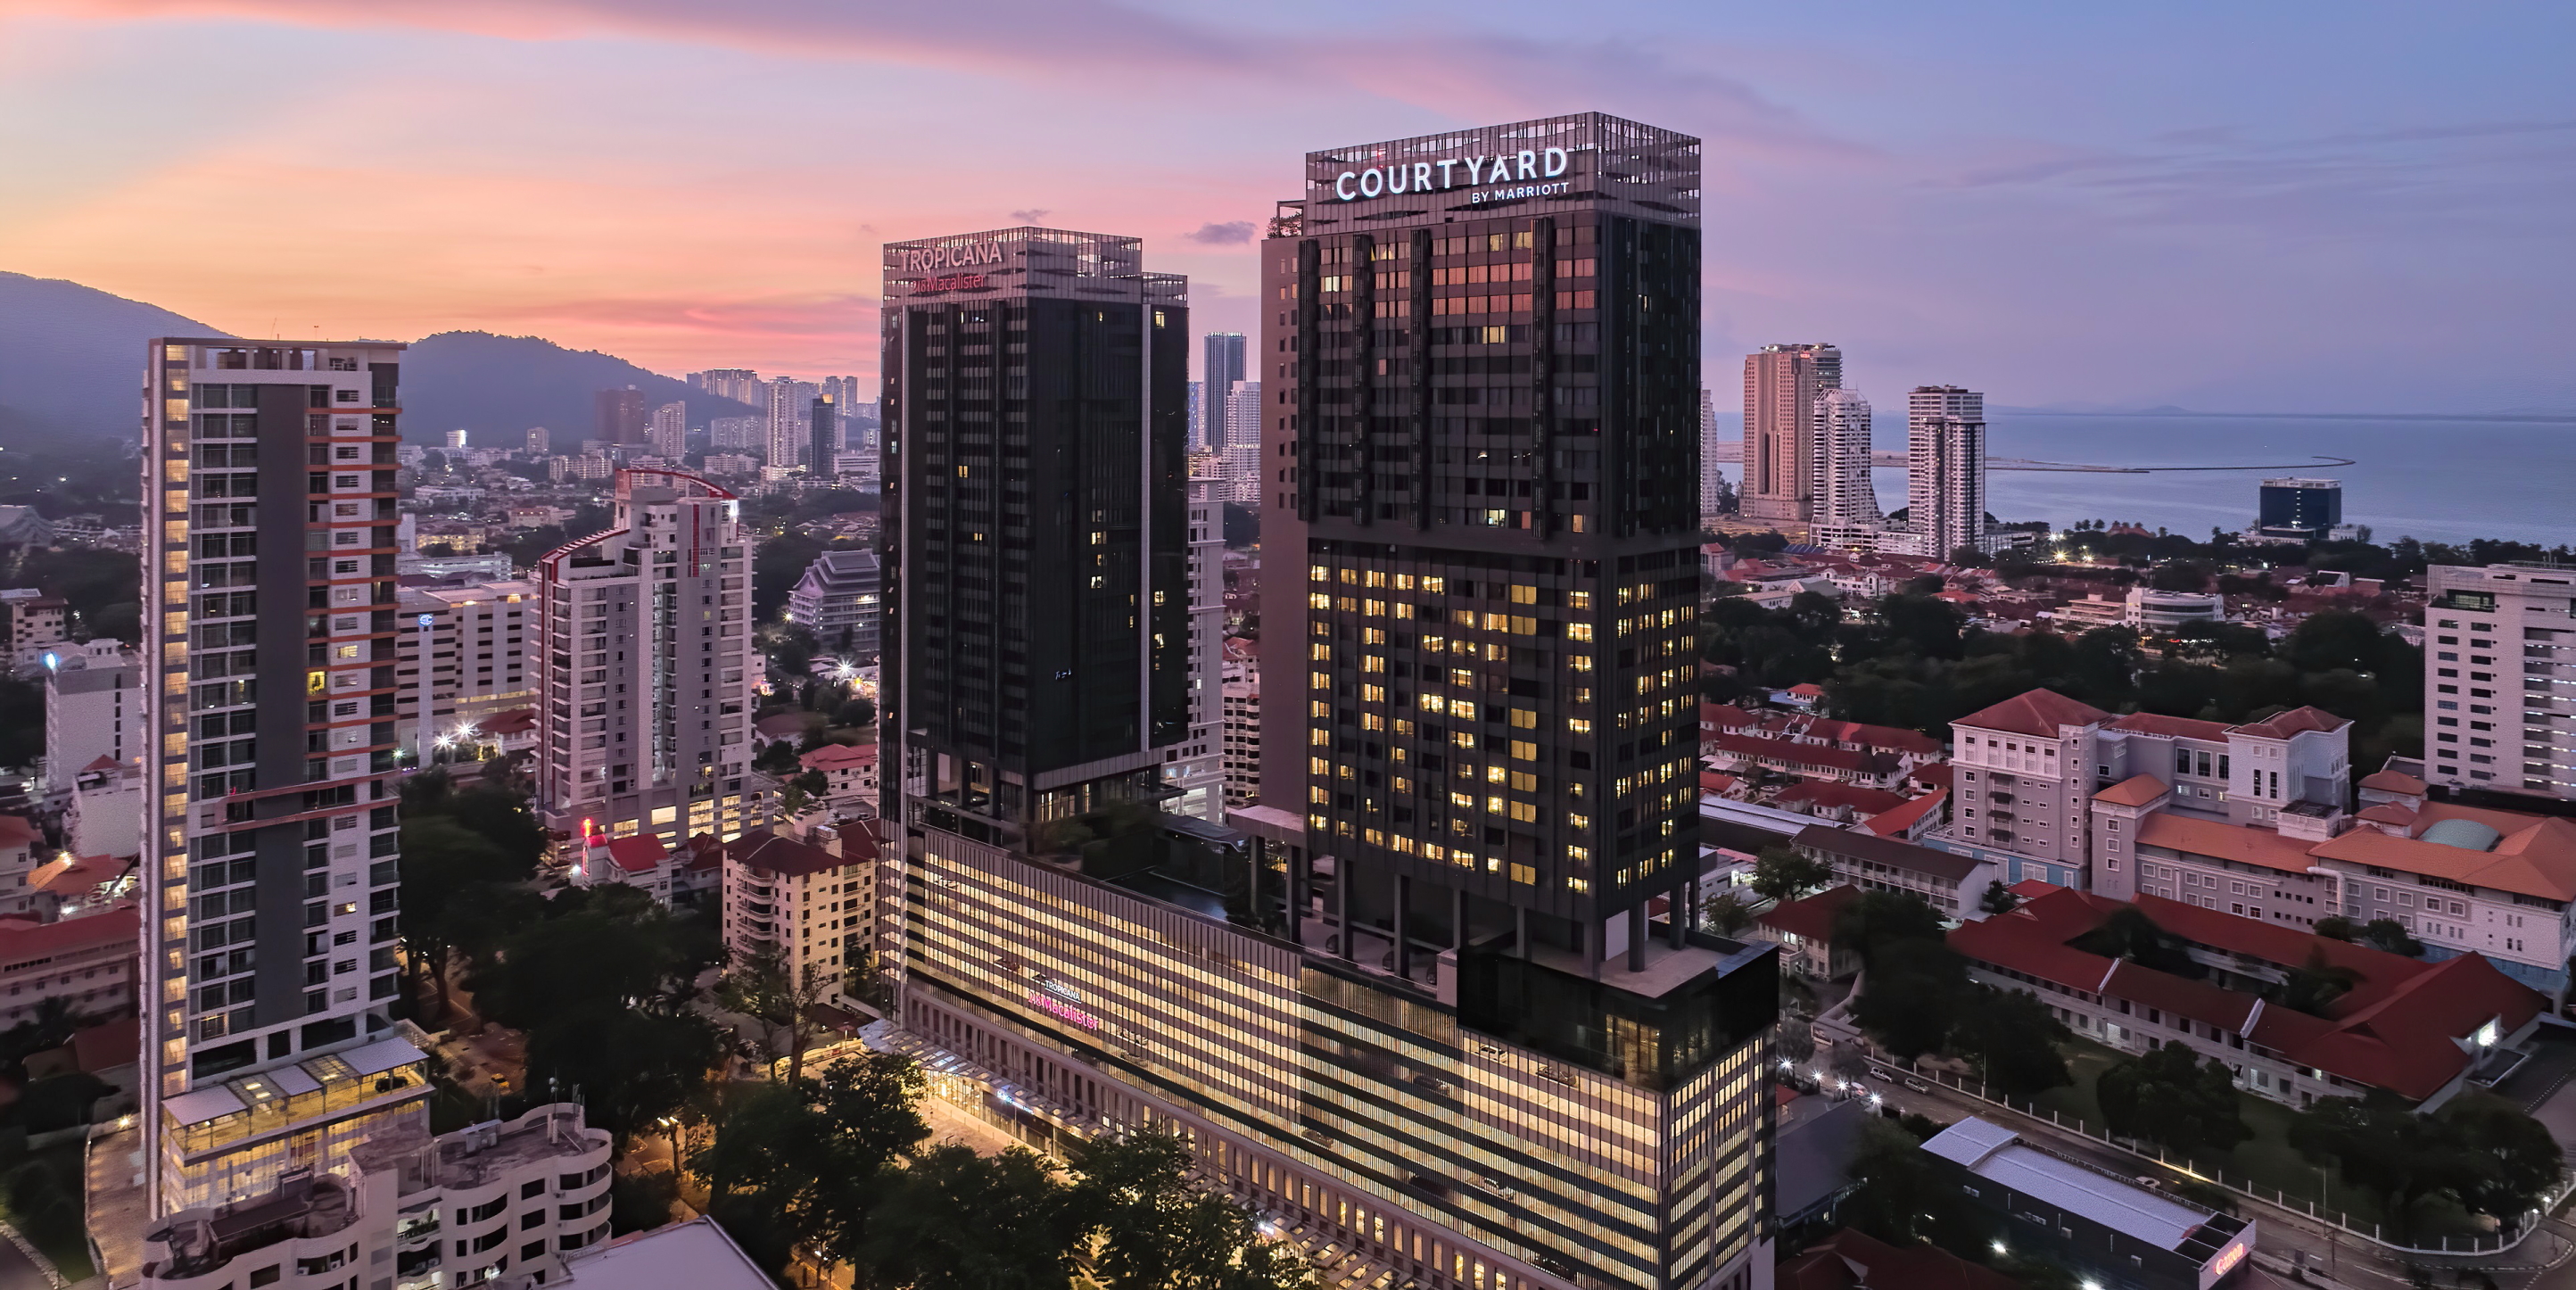 Marriott has expanded its popular Courtyard brand to Malaysia with the opening of the Courtyard by Marriott Penang. The new 199-room hotel is located along the bustling Jalan Macalister in the heart of Penang’s UNESCO-listed George Town. Click to enlarge.